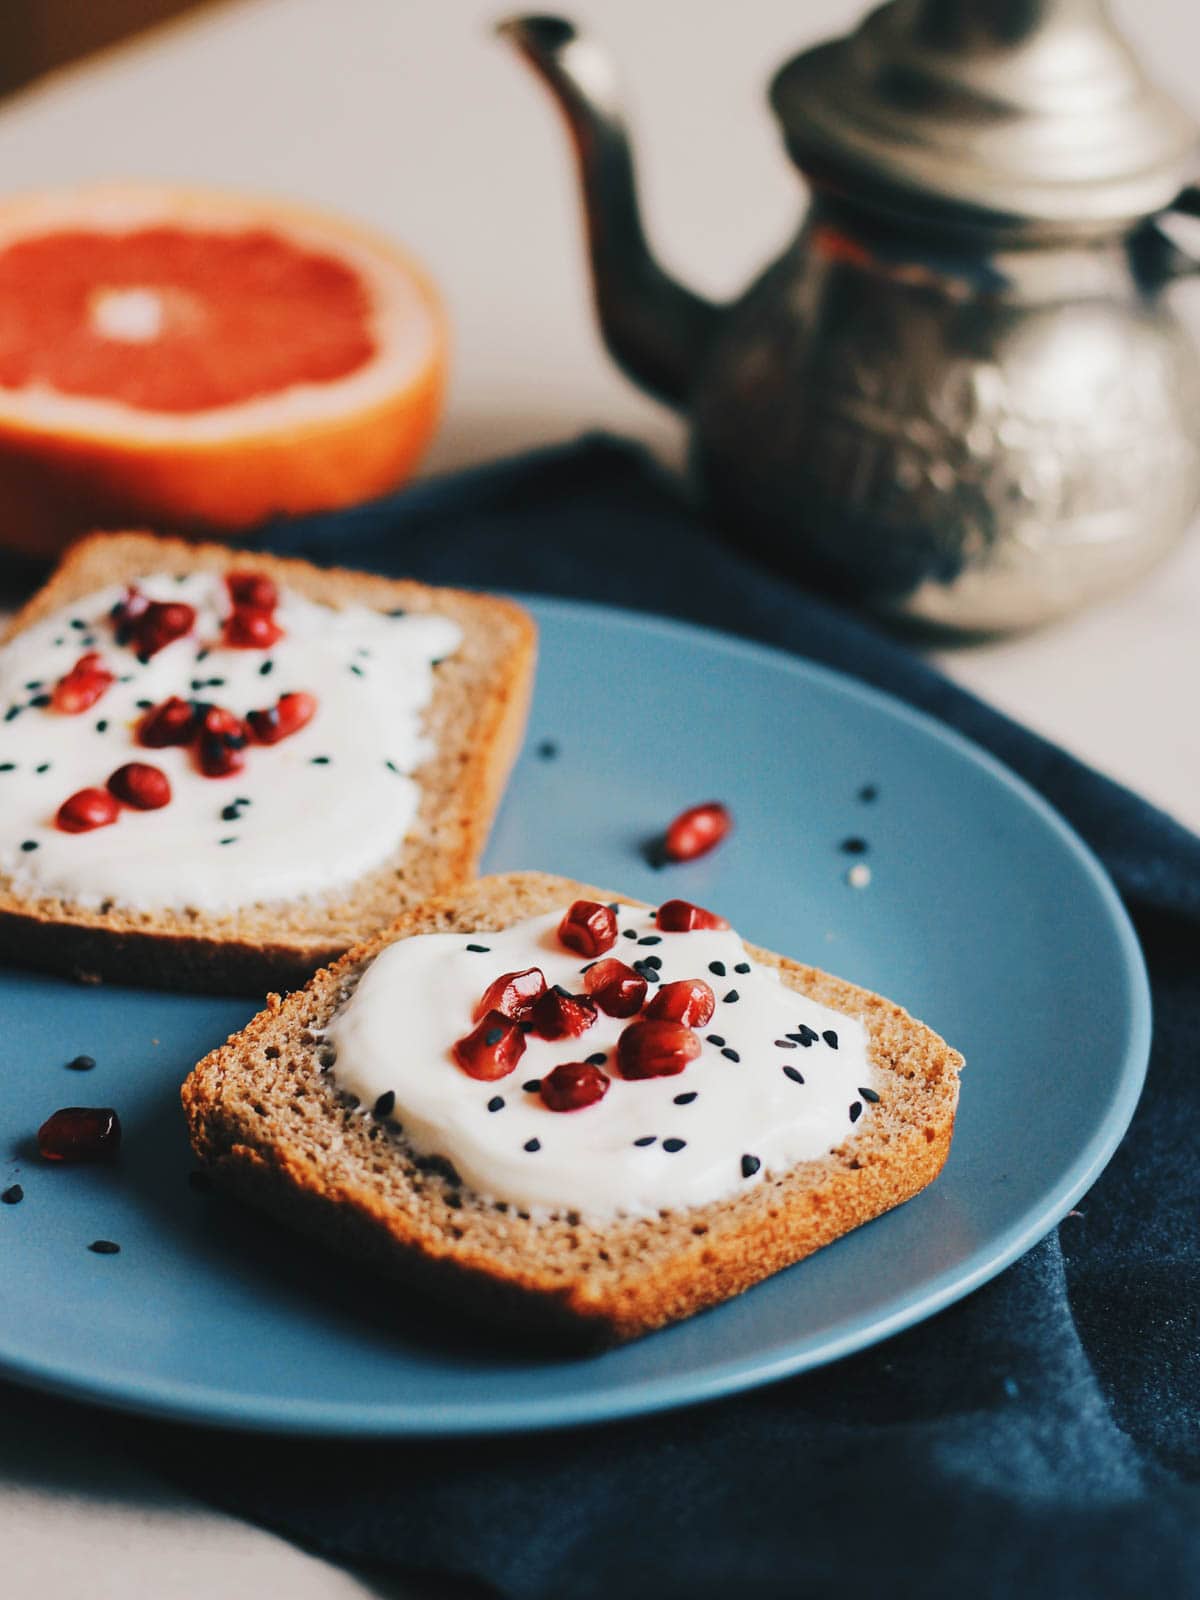 Two pieces of toast placed on a blue plate with a creamy topping, pomegranates and nigellas seeds sprinkled on top.